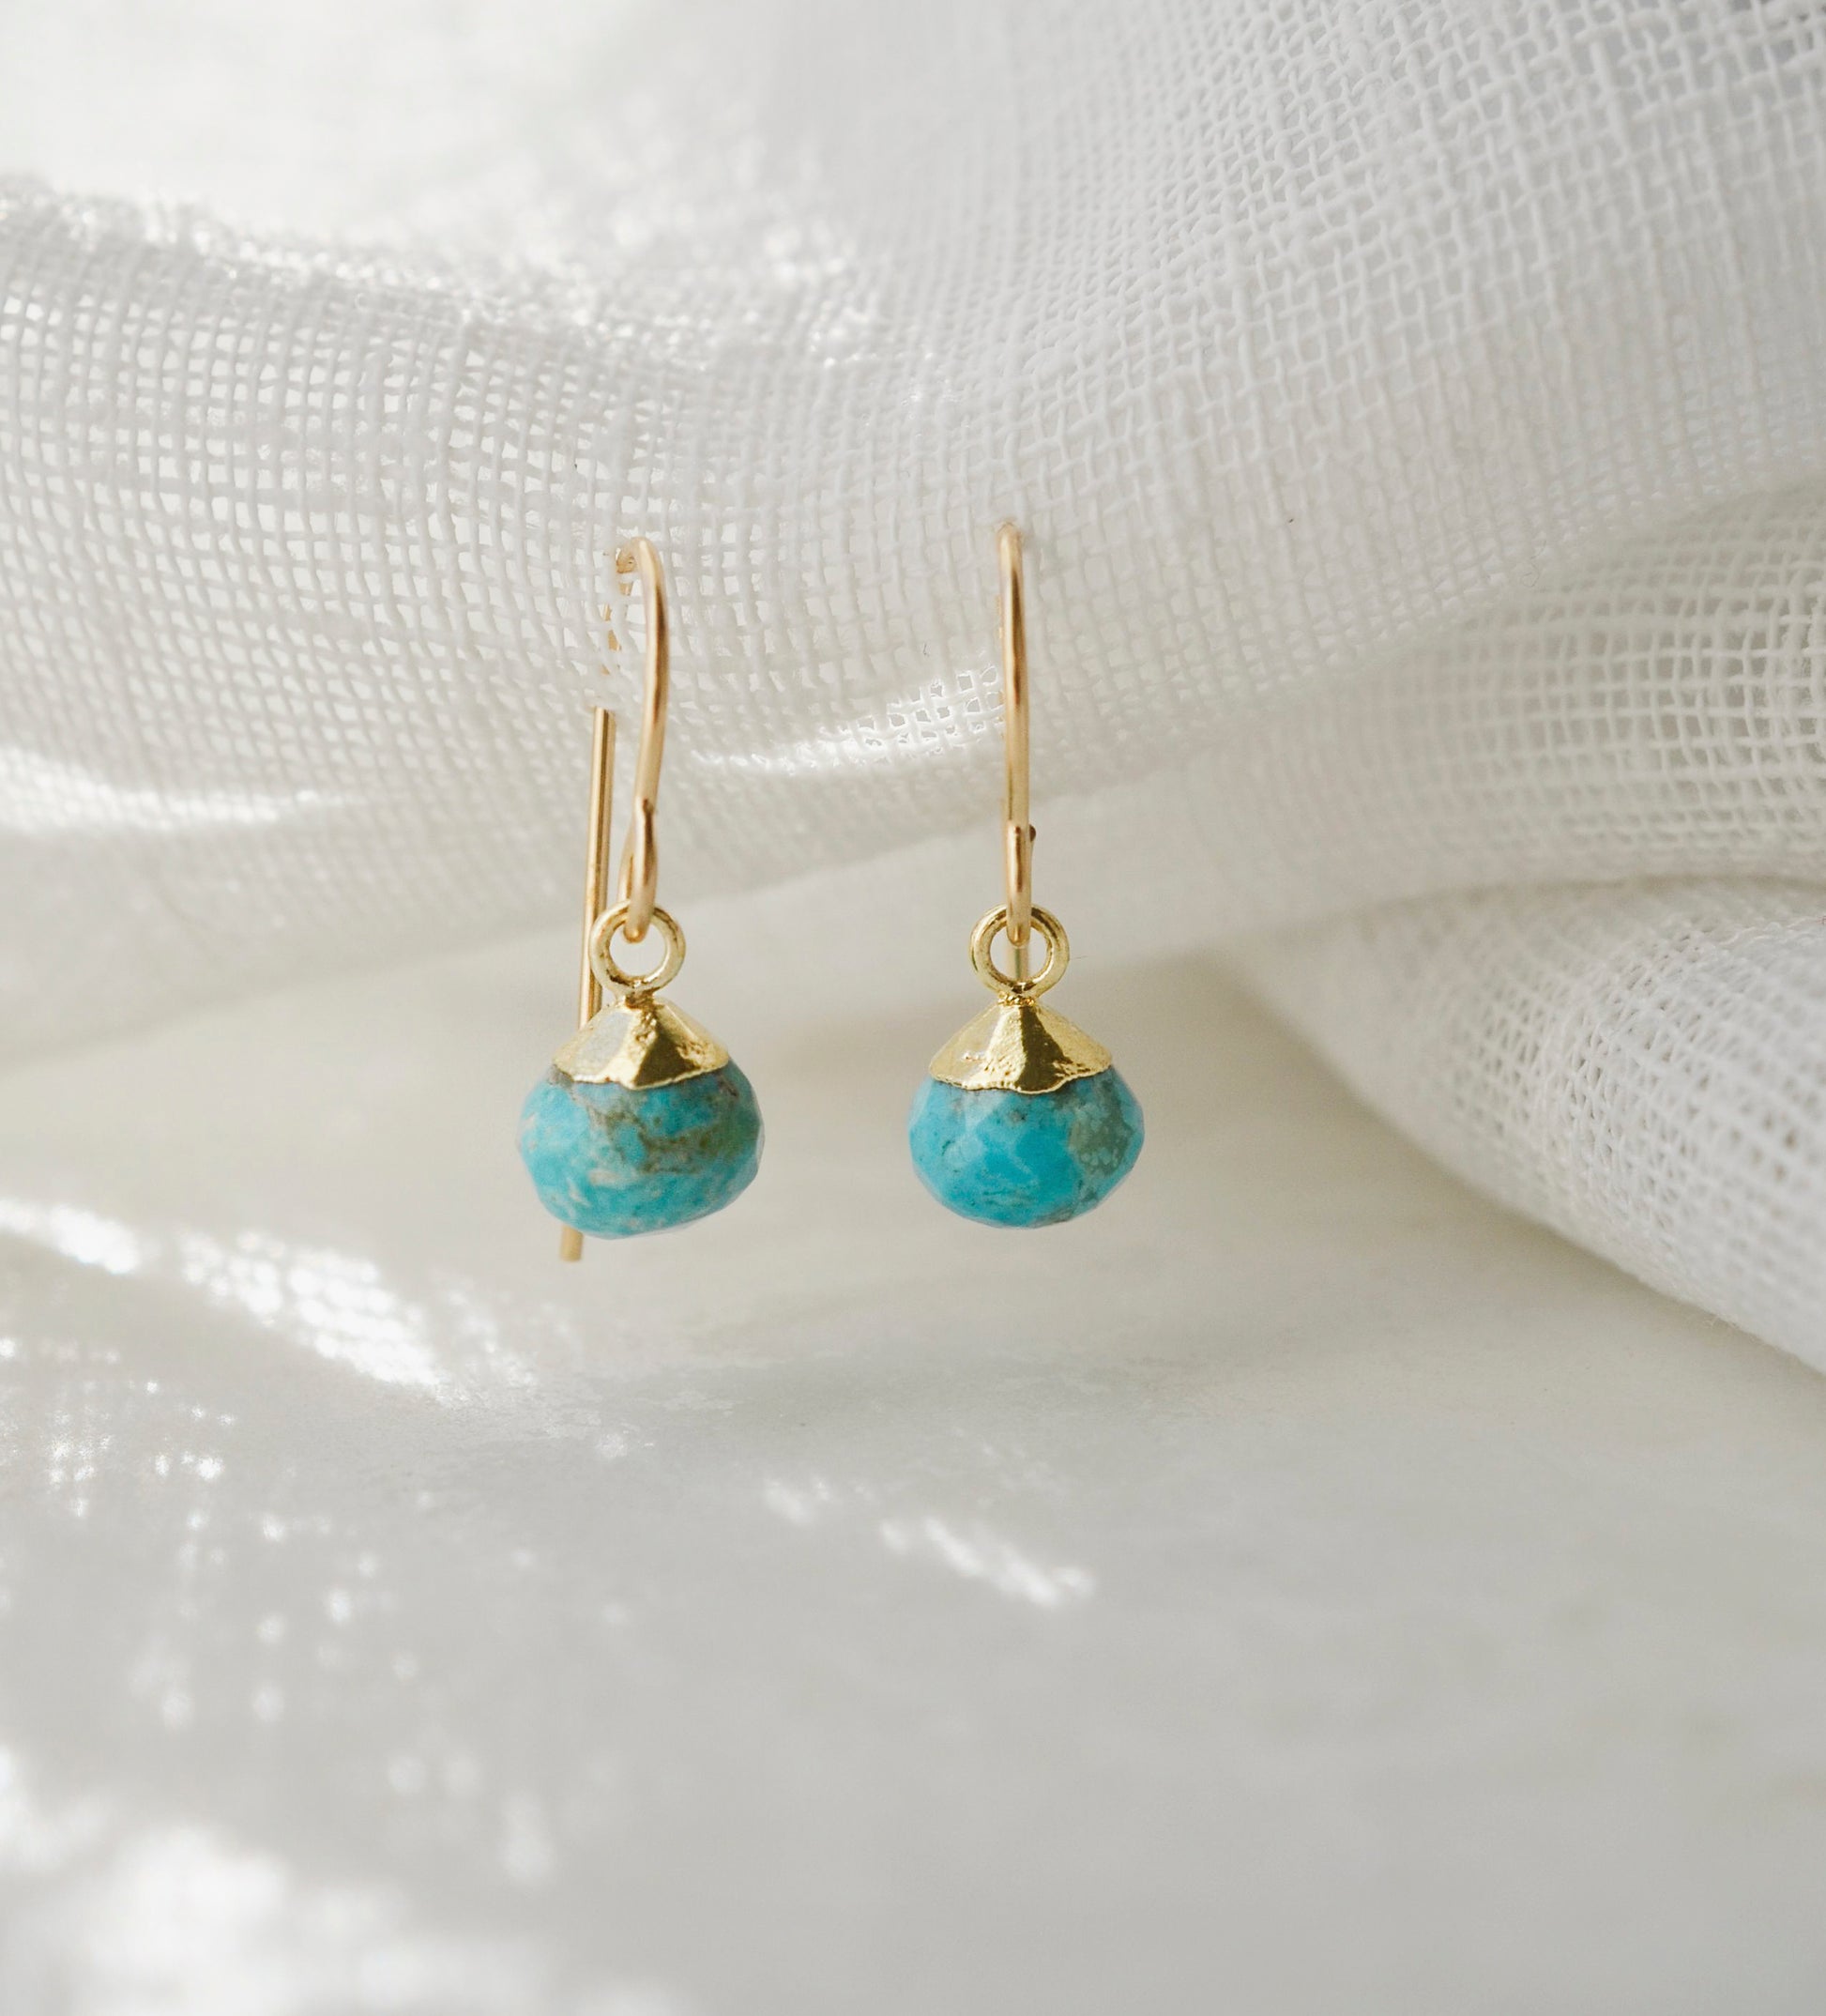 Small round turquoise faceted drops suspended from gold filled earwires. Each stone has a different matrix with light to dark brown coloring.